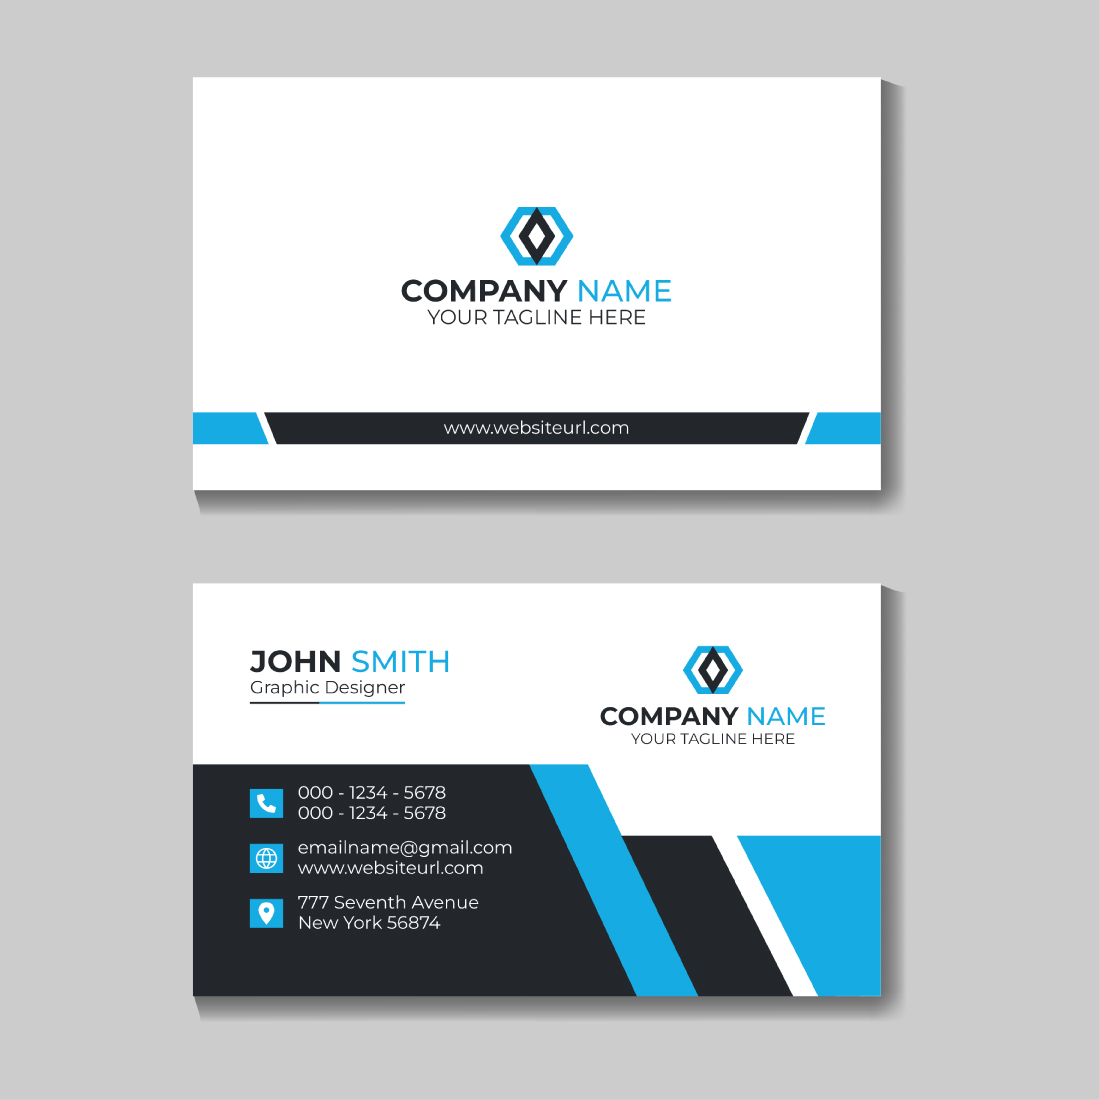 blue color Corporate Professional Creative Clean Business Card Design Template with 4 Colors.